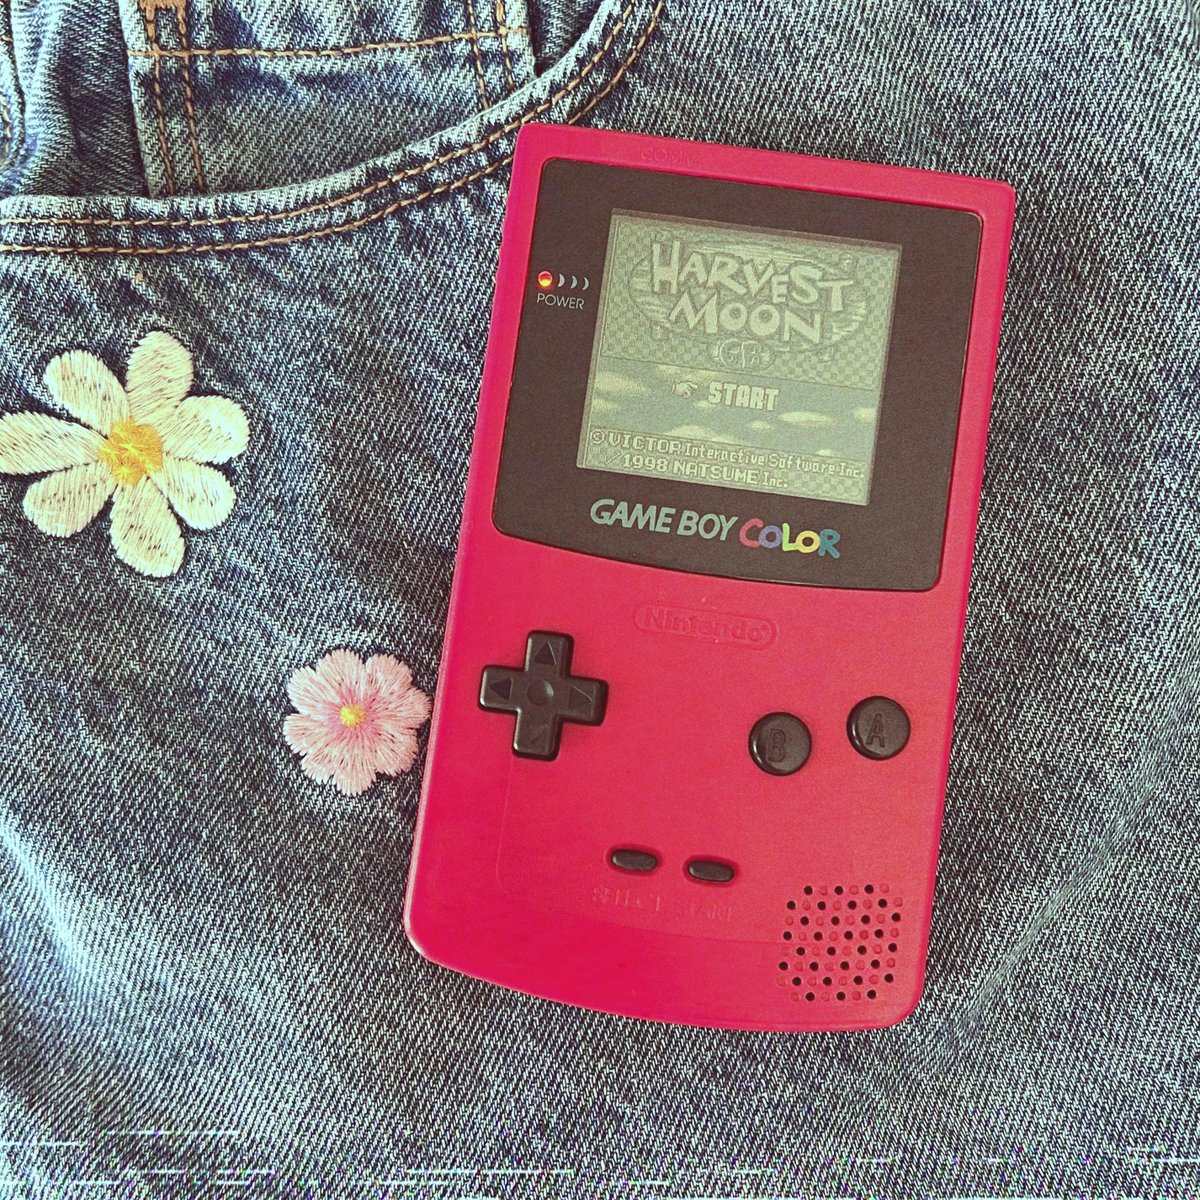 It’s 4 PM on a Thursday in 1998. Homework is done, you’re eating Dunkaroos, and powering up your Game Boy to take care of your farm. Life is good. #HarvestMoon25